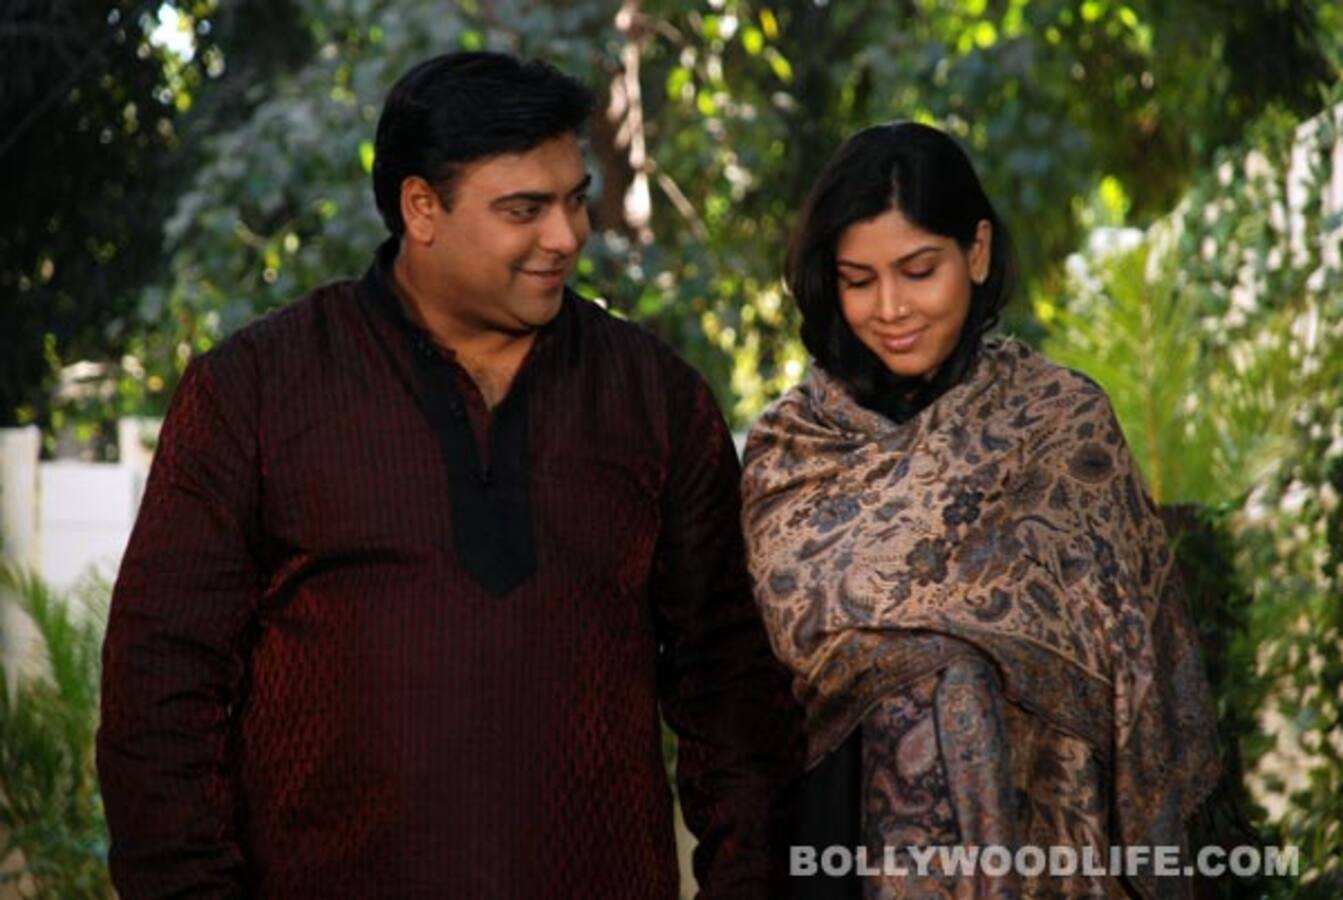 Bade Acche Lagte Hain: Will Ram Kapoor and Priya Kapoor resolve their latest fight?